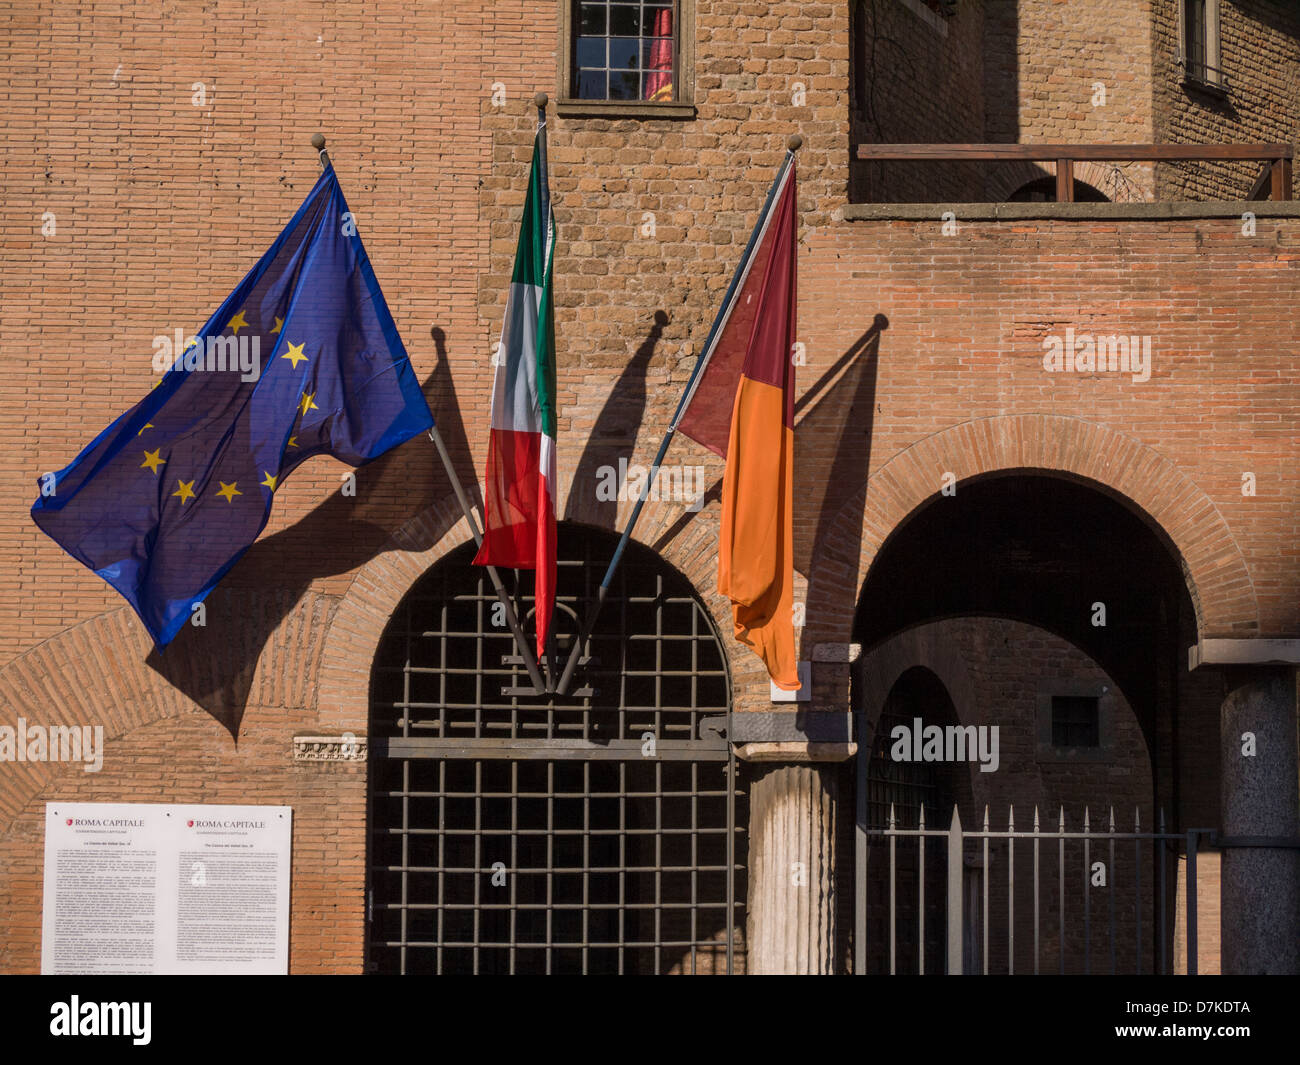 flags are flying on an old building, Europe, Italy Stock Photo